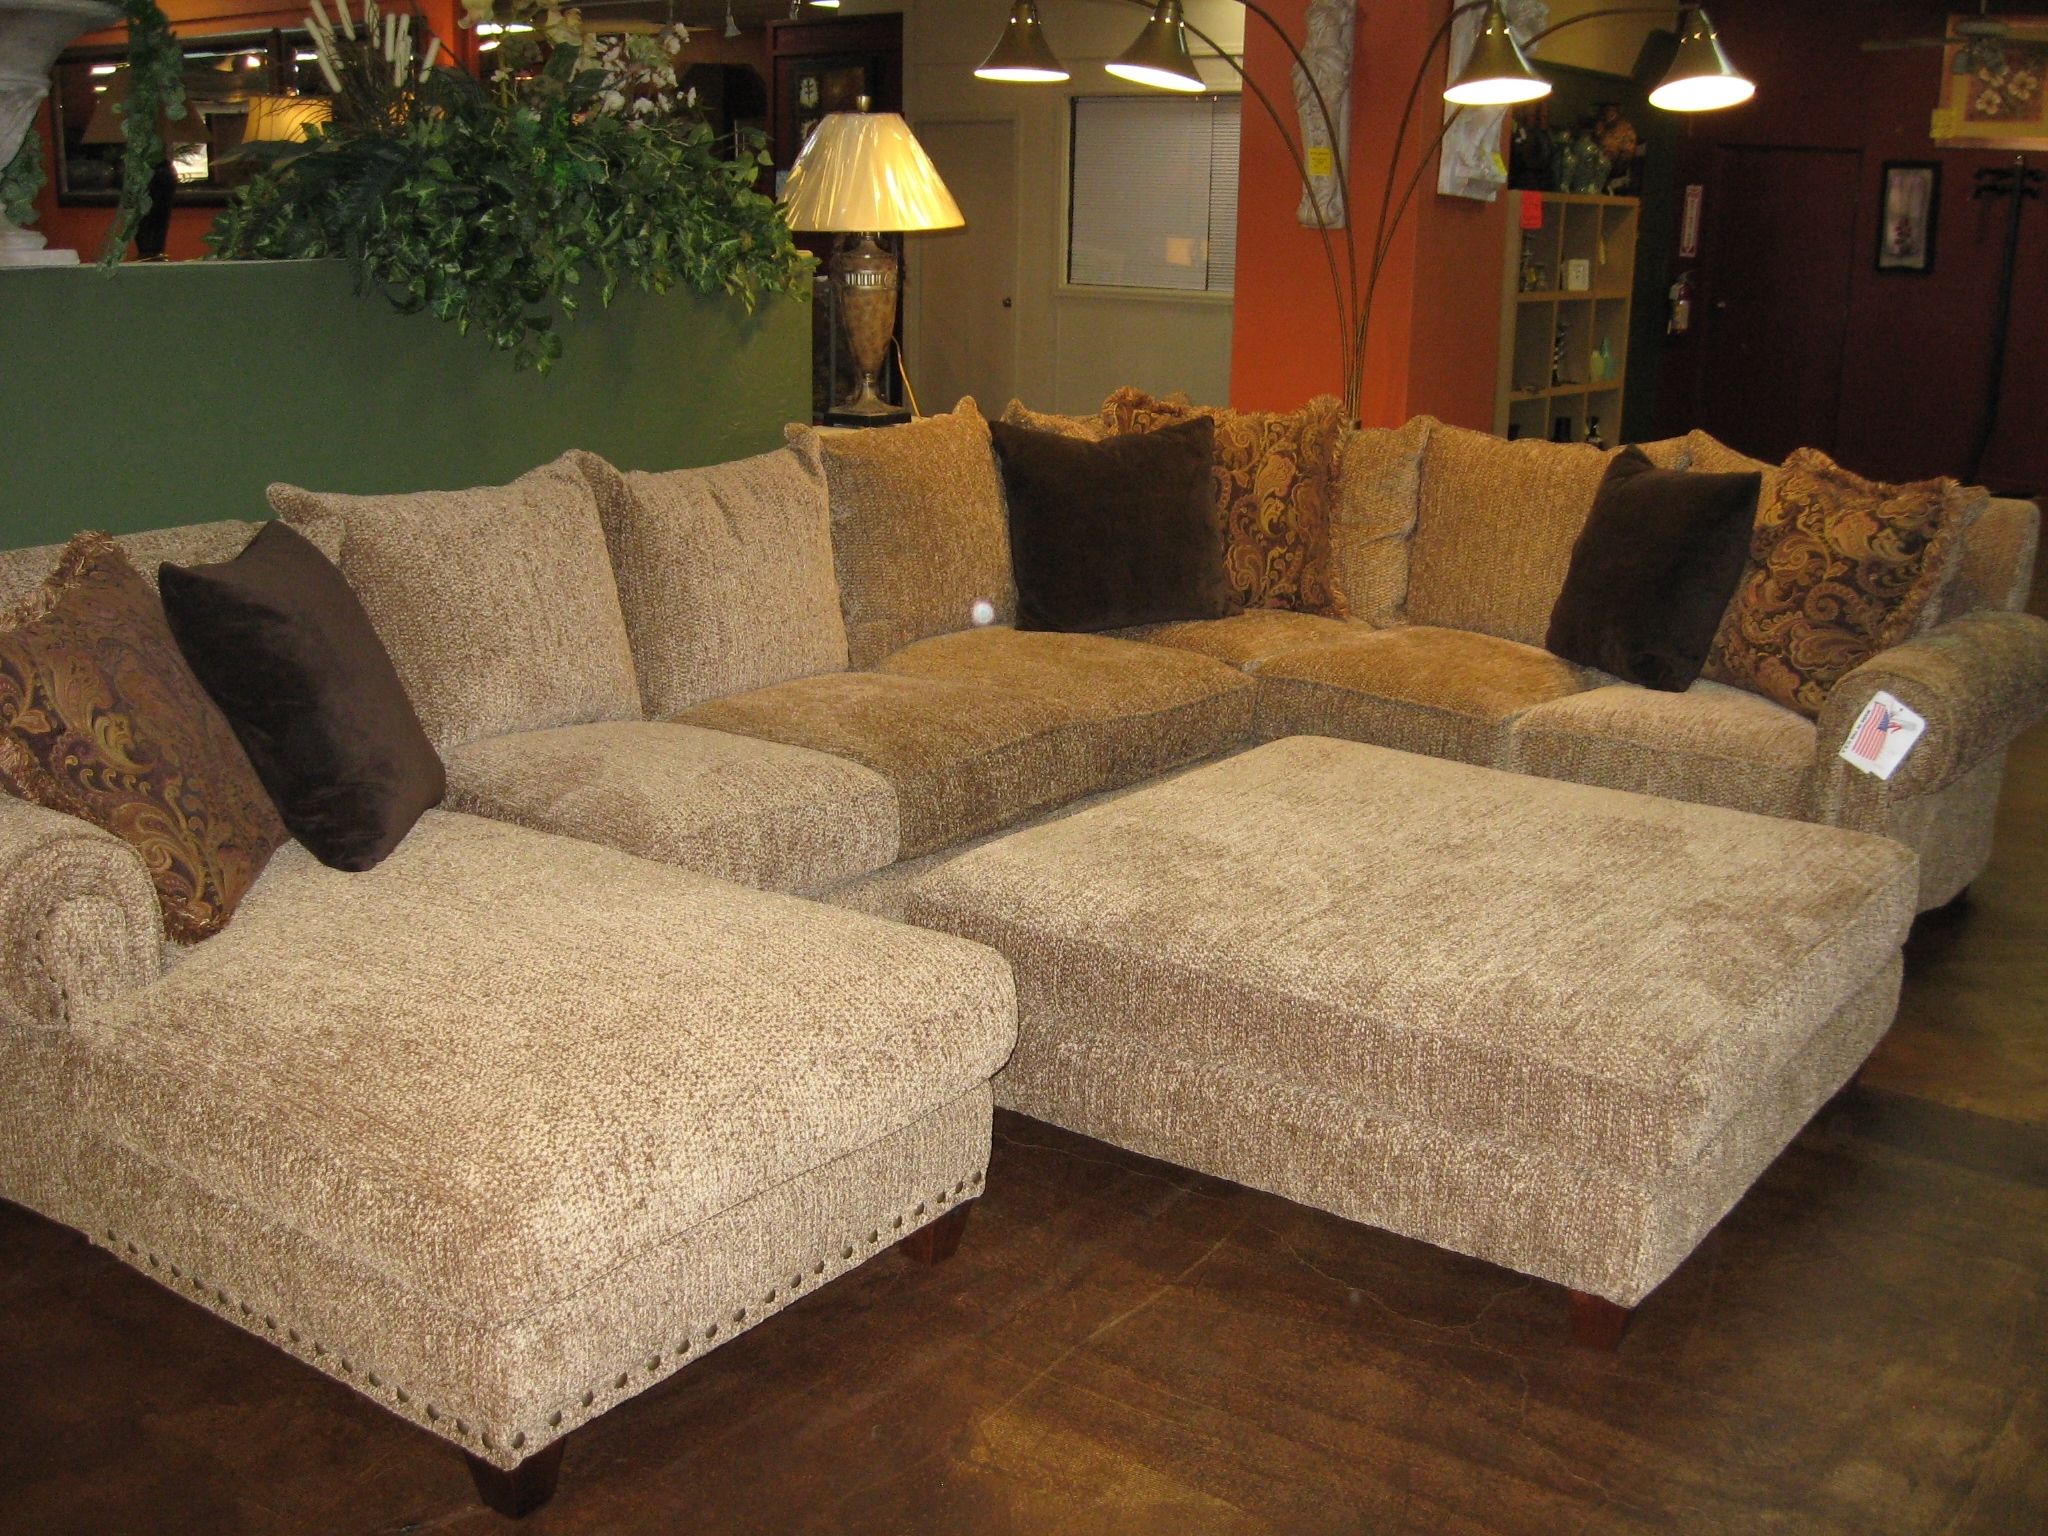 Elegant Large Sectional Sofa With Ottoman 52 With Additional Modern Pertaining To Couches With Large Ottoman (View 6 of 15)